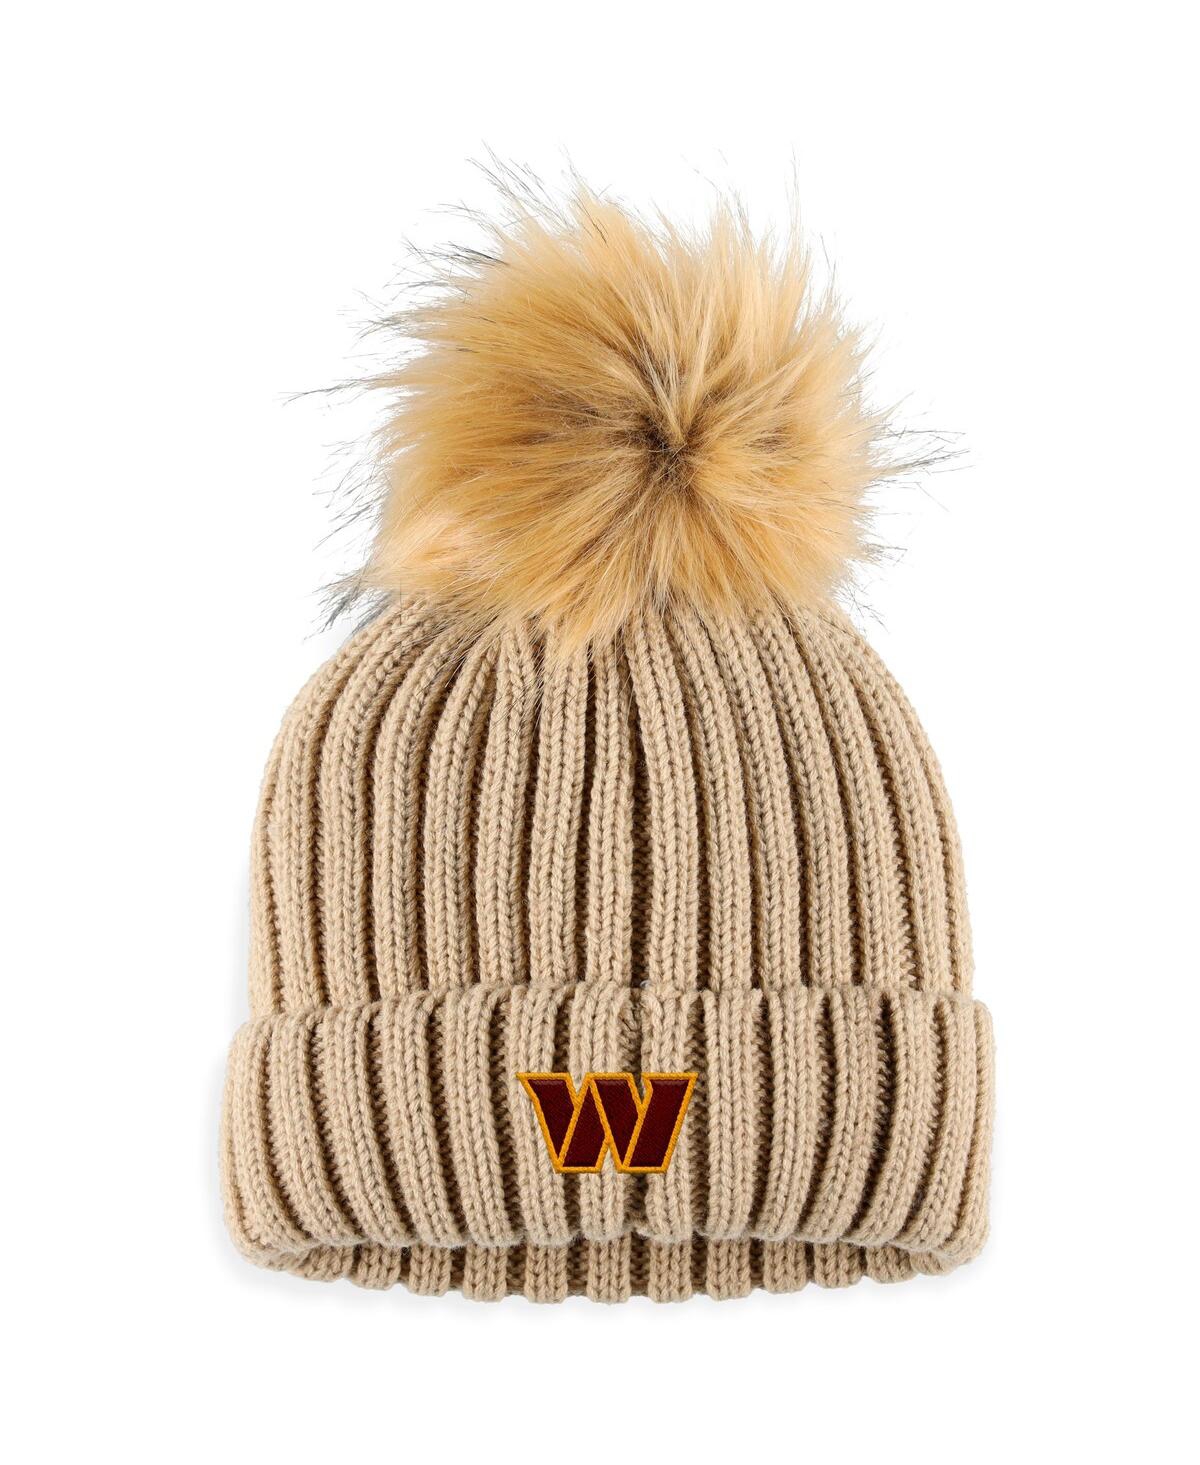 Wear By Erin Andrews Women's  Natural Washington Commanders Neutral Cuffed Knit Hat With Pom